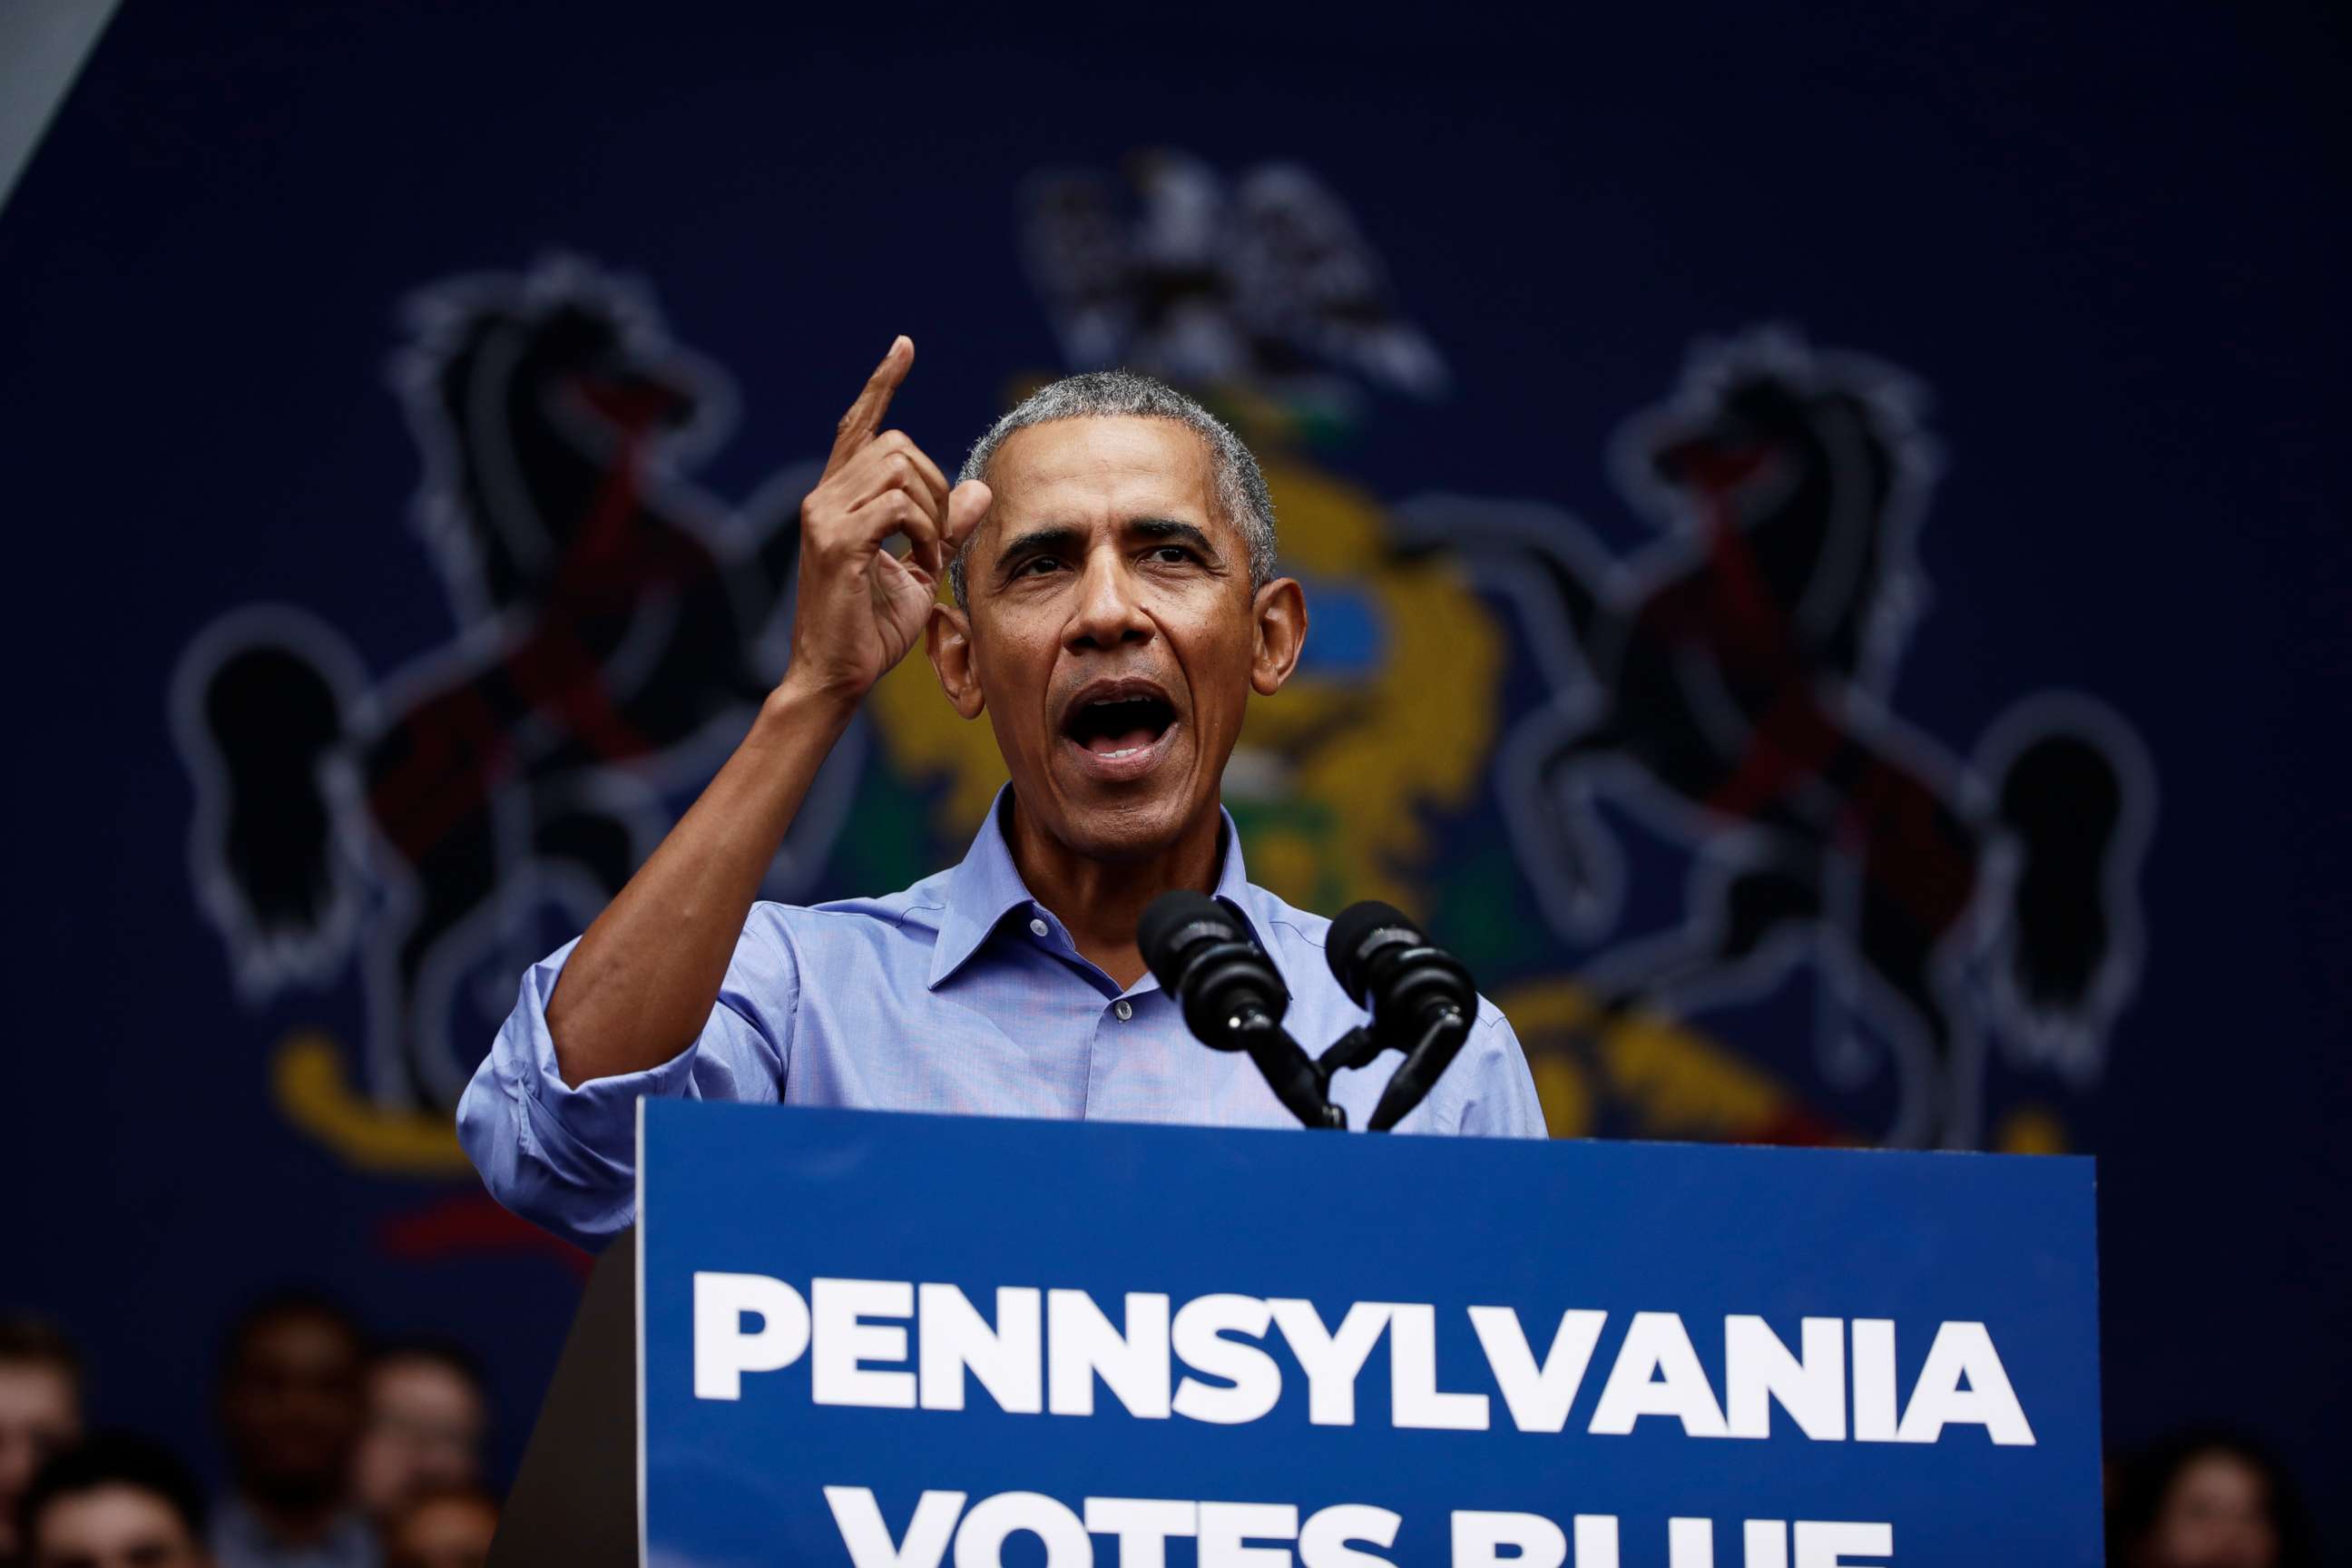 PHOTO: Former President Barack Obama speaks as he campaigns in support of Pennsylvania candidates in Philadelphia, Sept. 21, 2018.